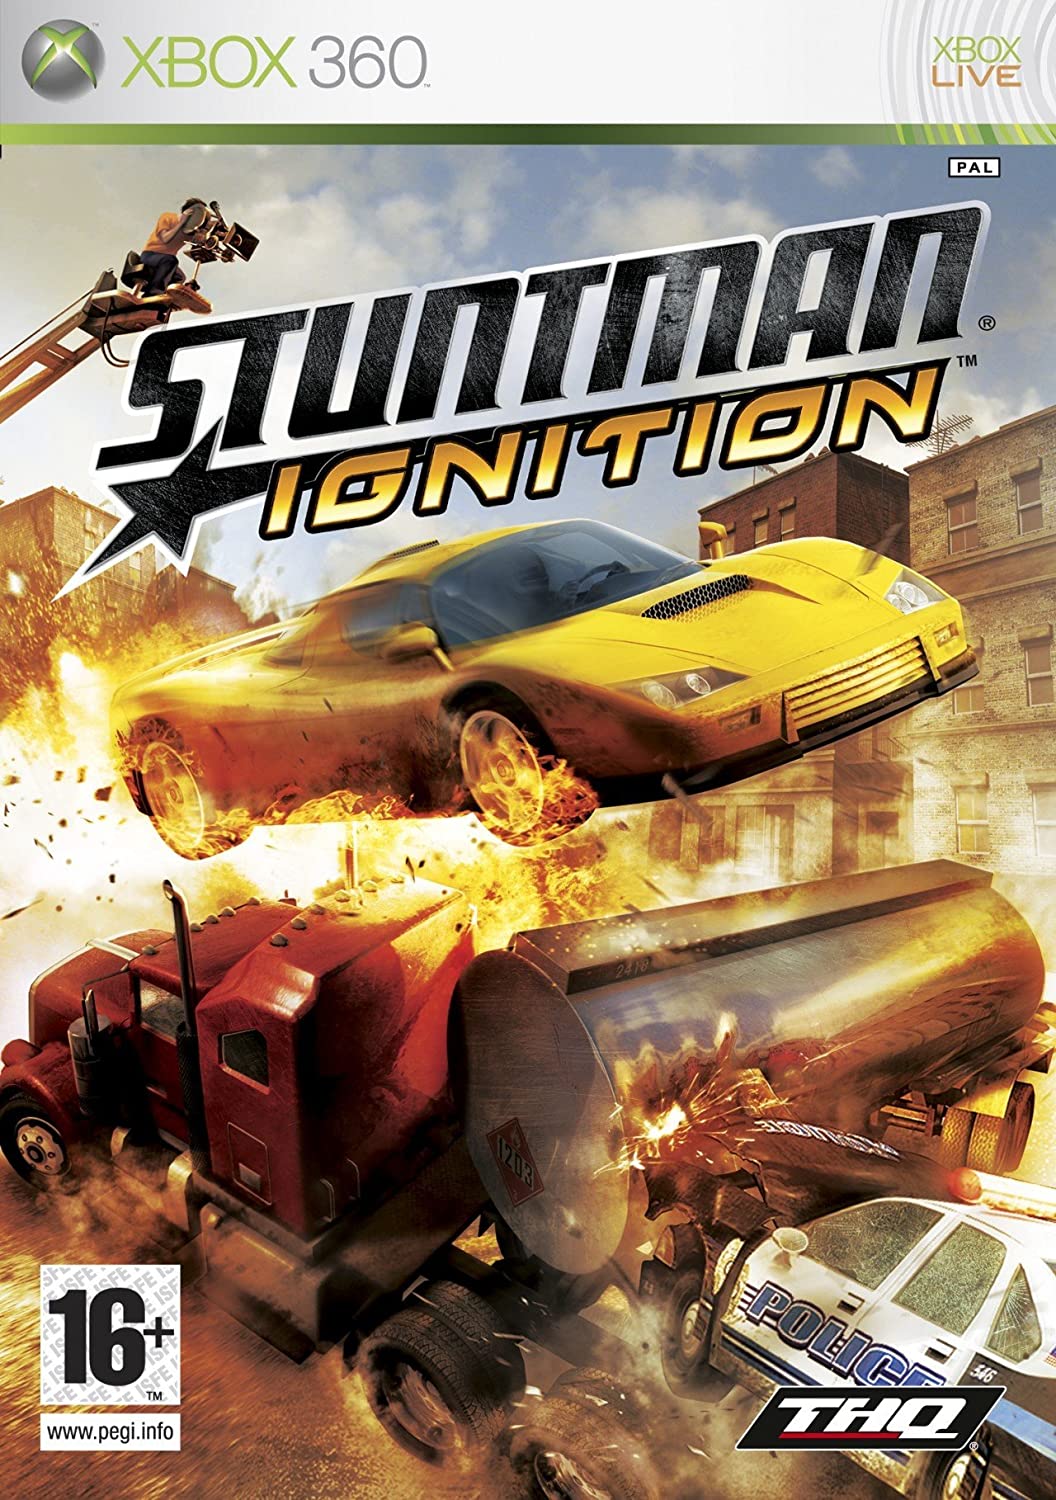 Stuntman: Ignition player count stats